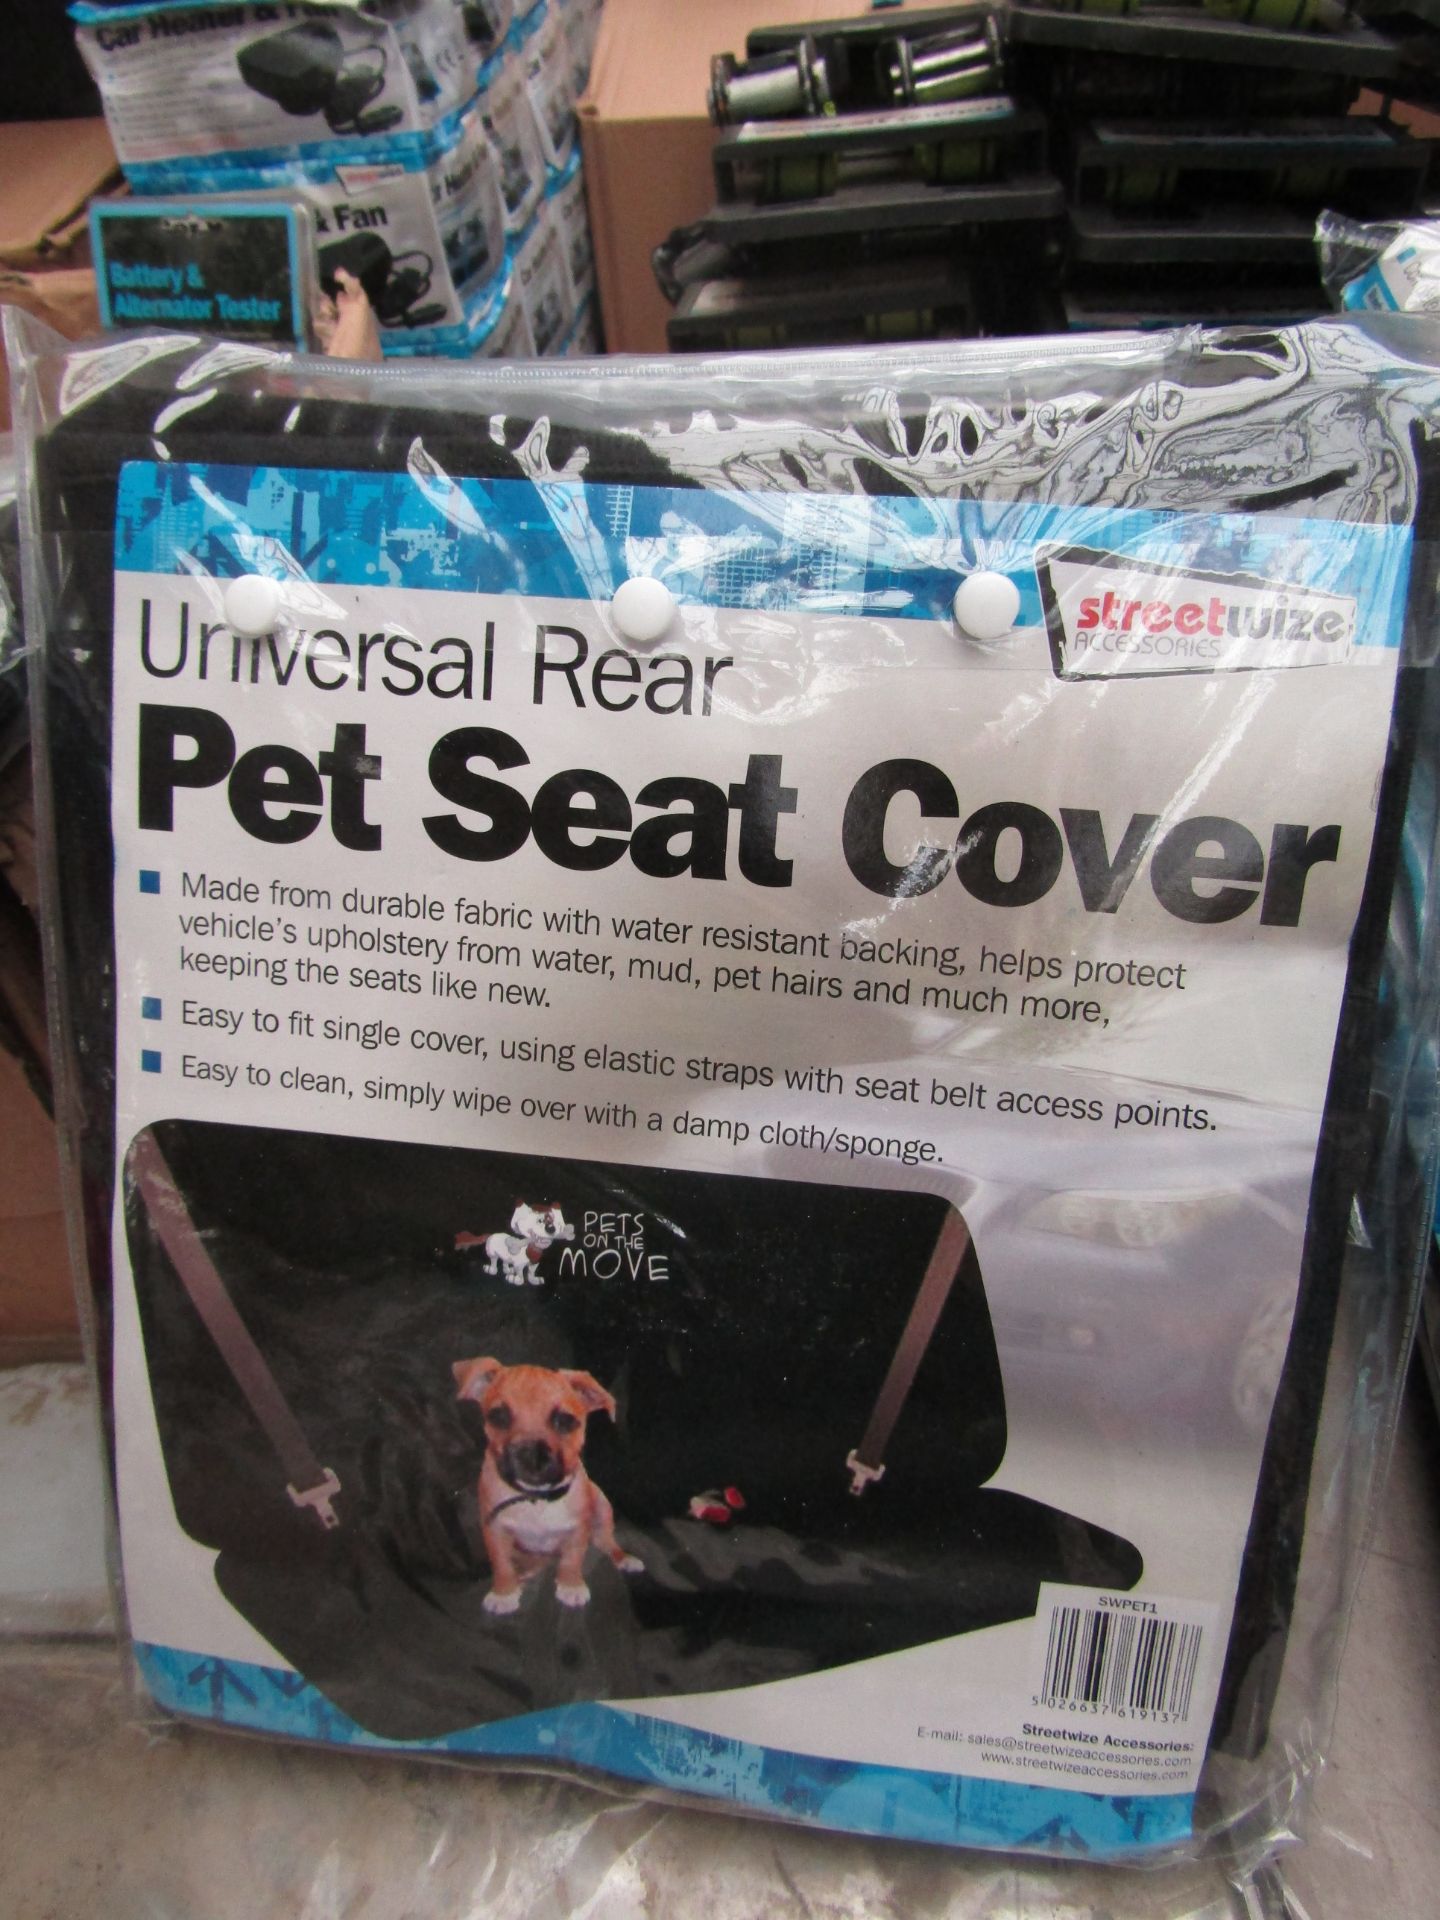 Streetwise Universal Rear Pet seat cover, new in packaging